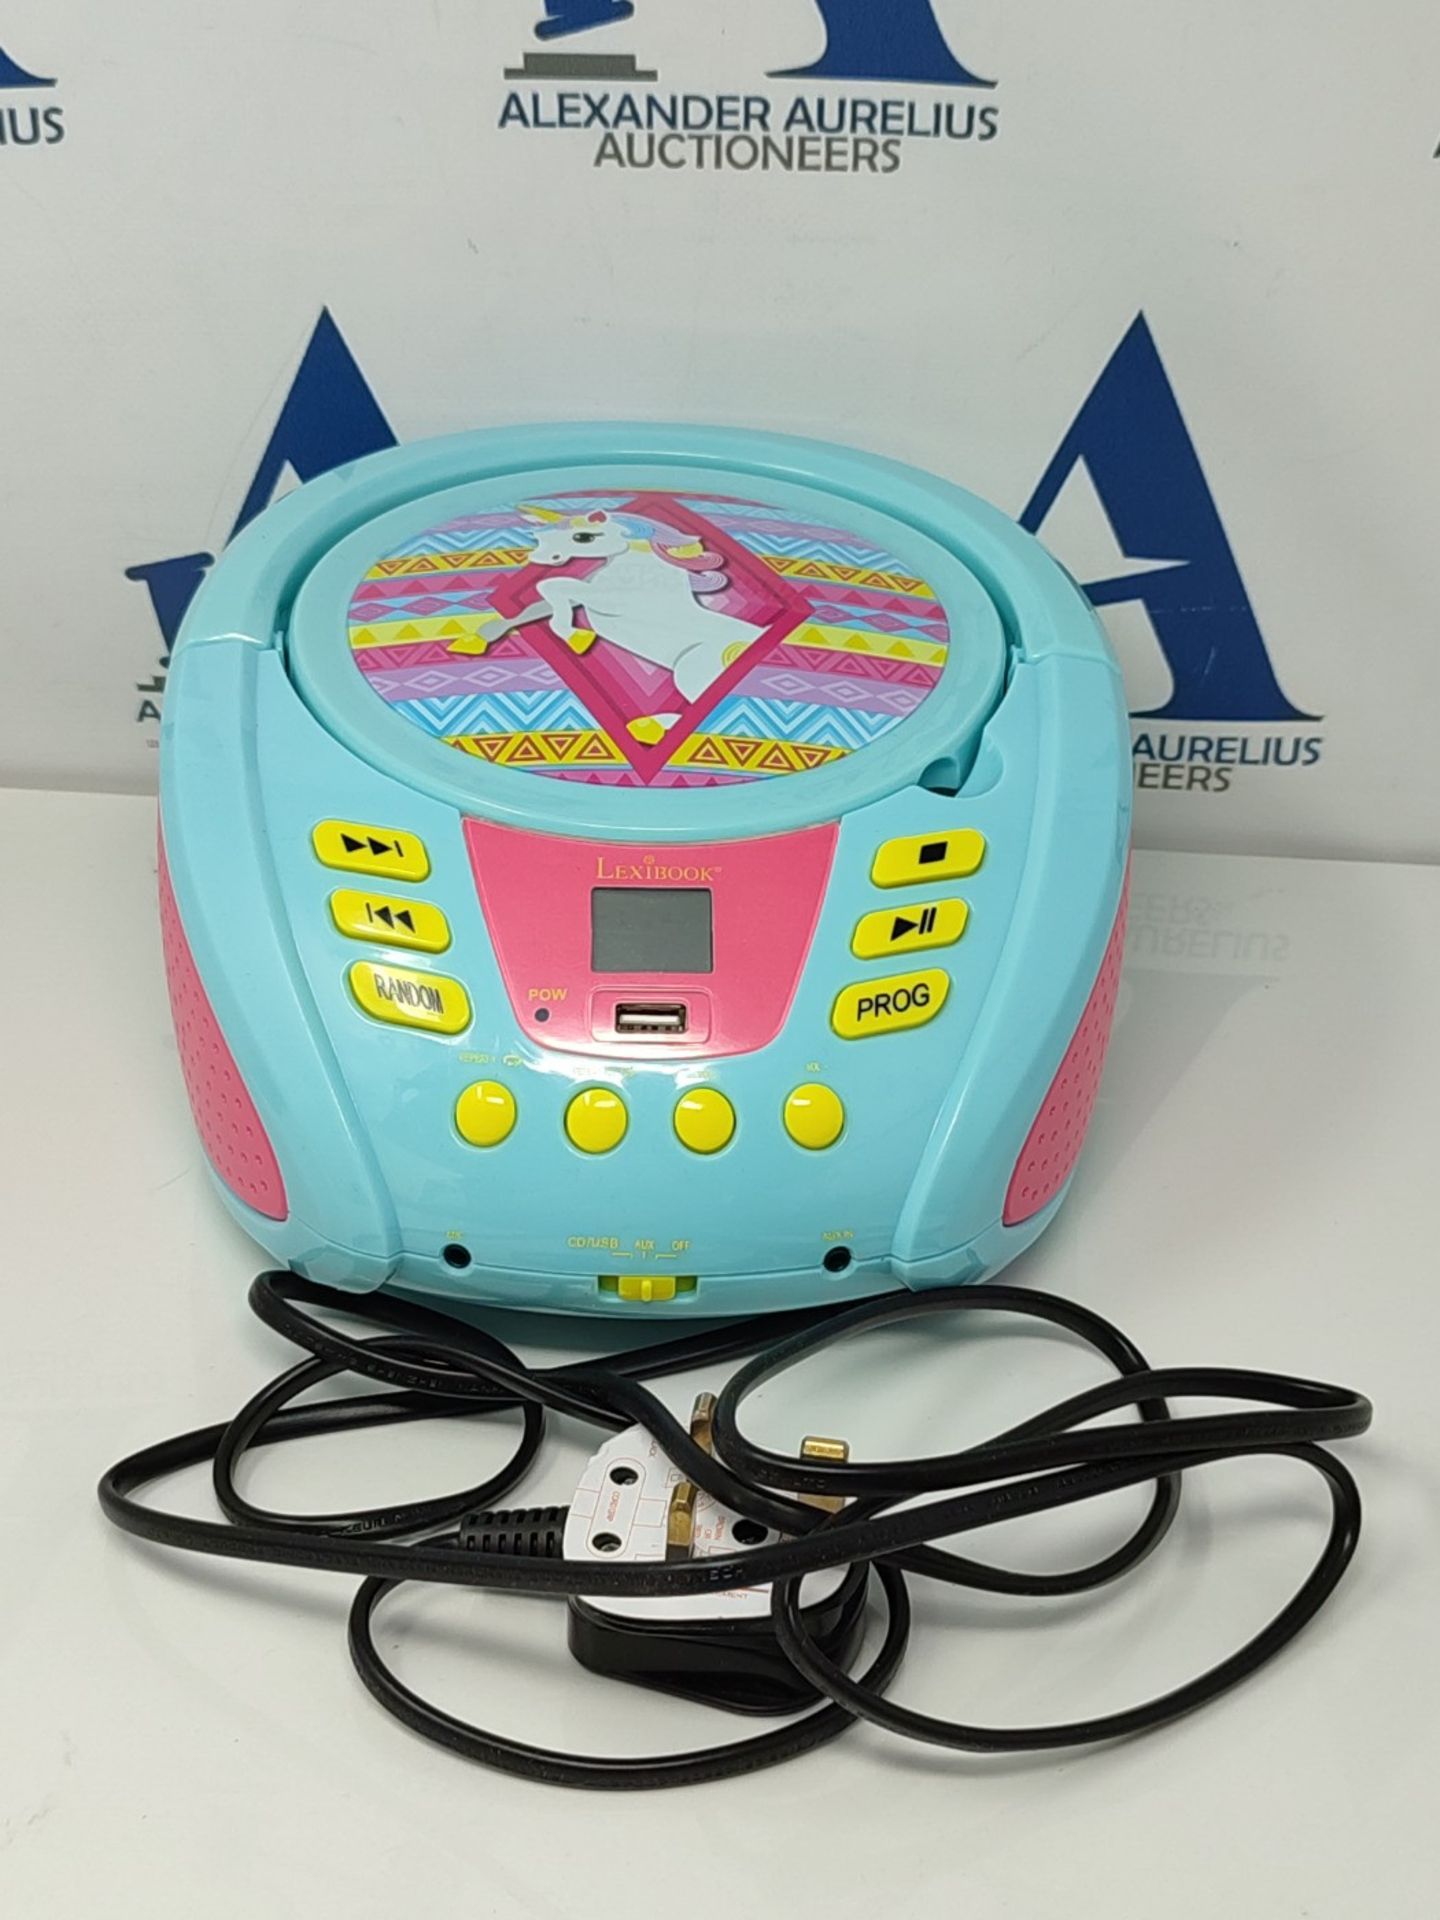 Lexibook CD Player Unicorn, AUX-in Jack, USB Port, AC or Battery-Operated, Blue/Pink, - Image 3 of 3